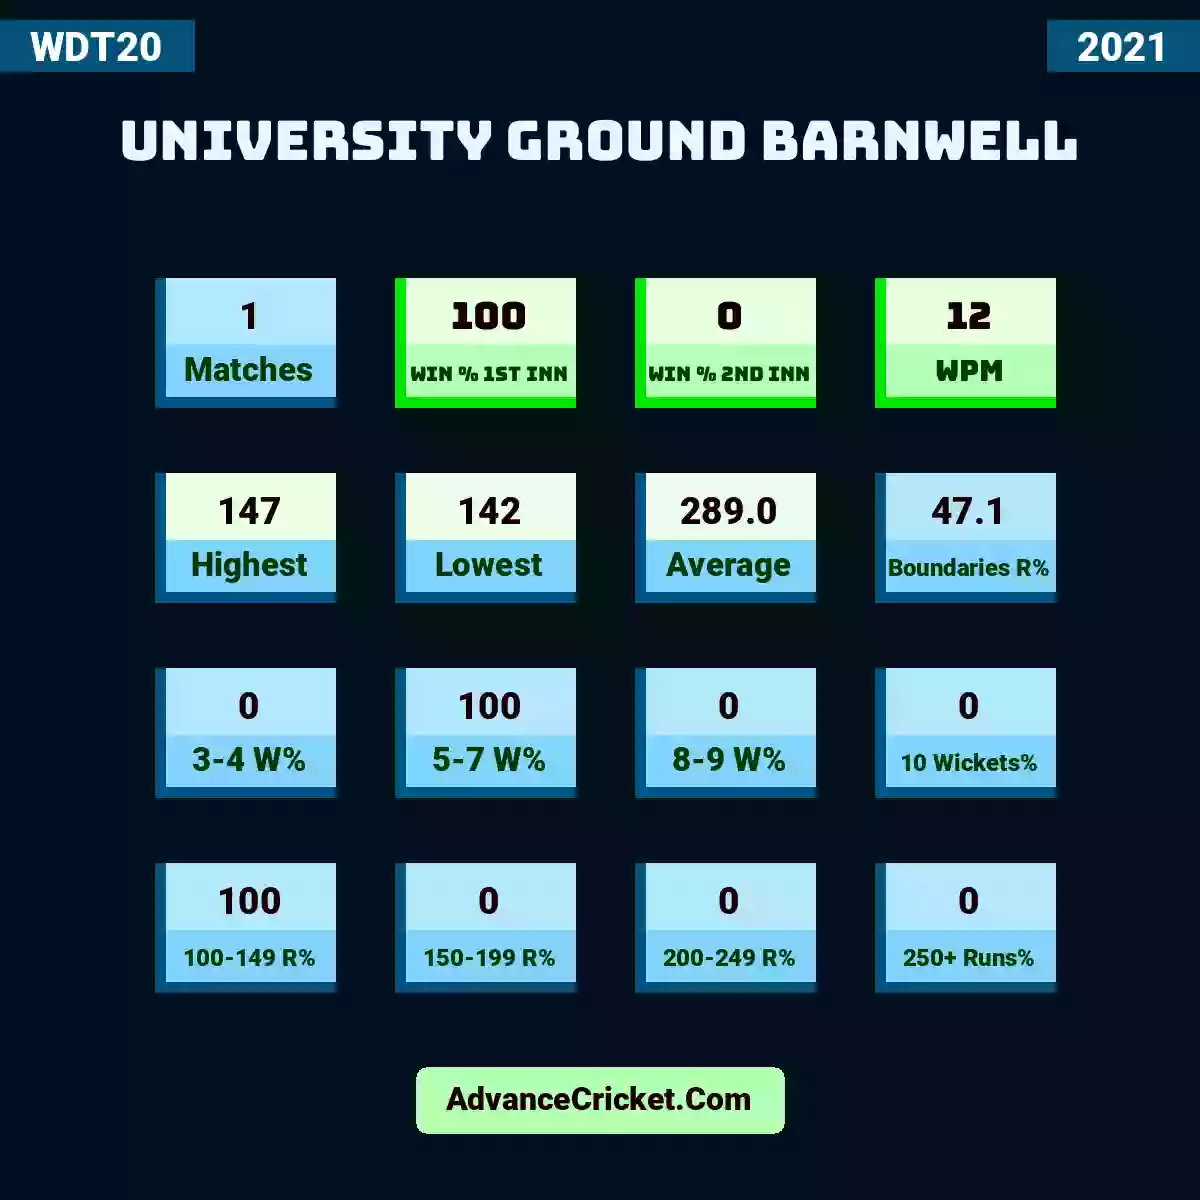 Image showing University Ground Barnwell with Matches: 1, Win % 1st Inn: 100, Win % 2nd Inn: 0, WPM: 12, Highest: 147, Lowest: 142, Average: 289.0, Boundaries R%: 47.1, 3-4 W%: 0, 5-7 W%: 100, 8-9 W%: 0, 10 Wickets%: 0, 100-149 R%: 100, 150-199 R%: 0, 200-249 R%: 0, 250+ Runs%: 0.